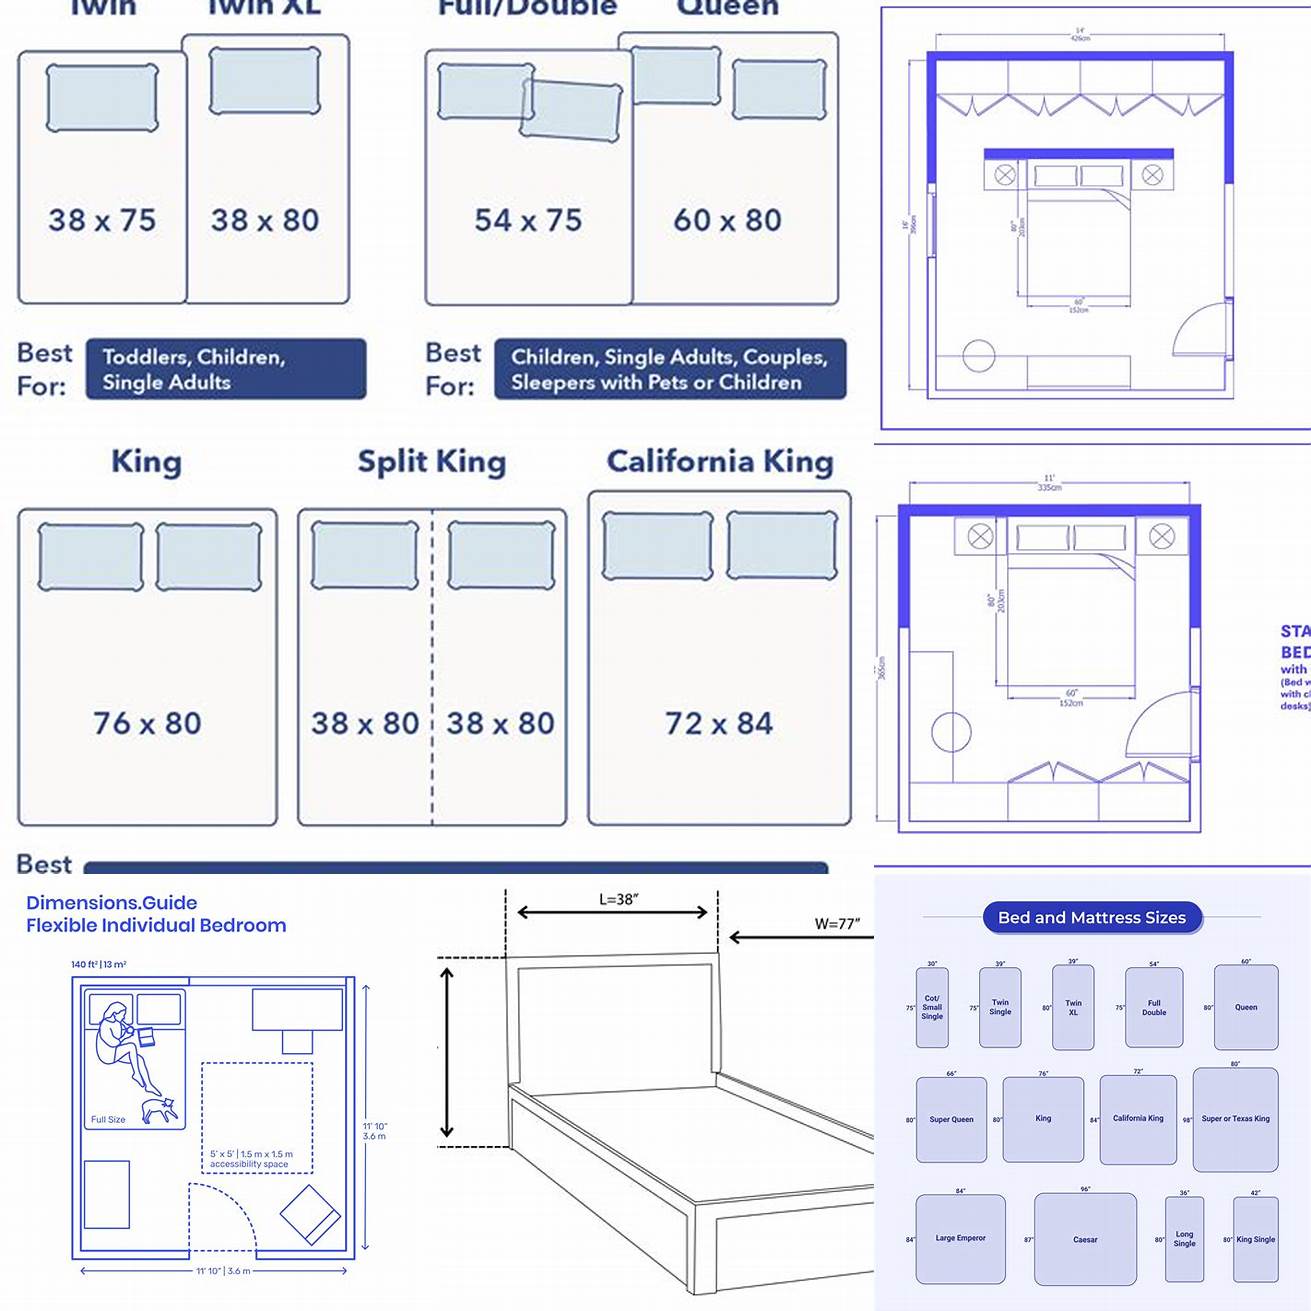 Check measurements Before making a purchase make sure to check the measurements of the bedroom set This will ensure that it fits perfectly in your space and doesnt create any logistical issues